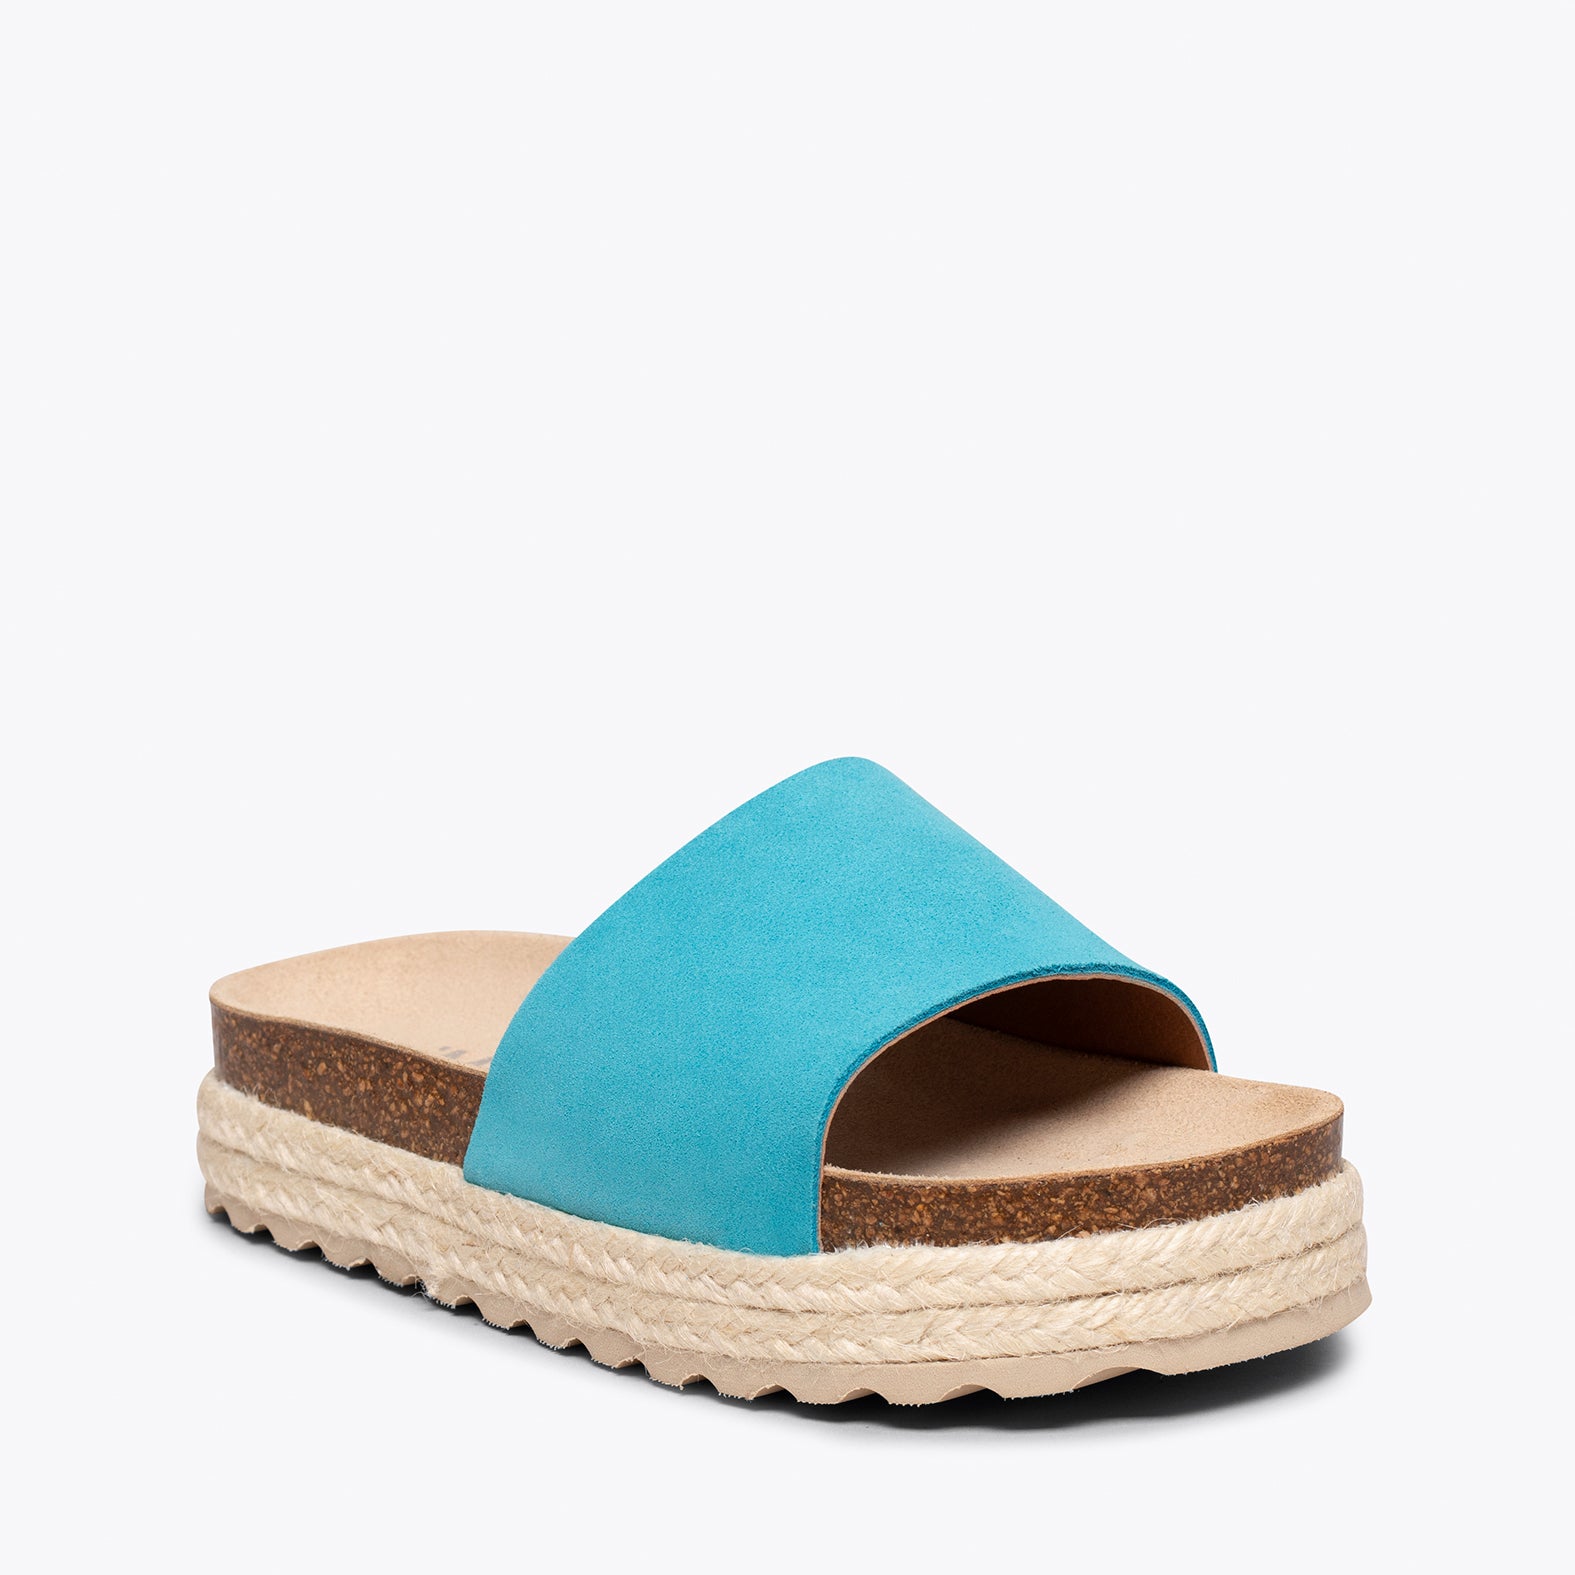 STRAWBERRY –TURQUOISE flat sandals for girls